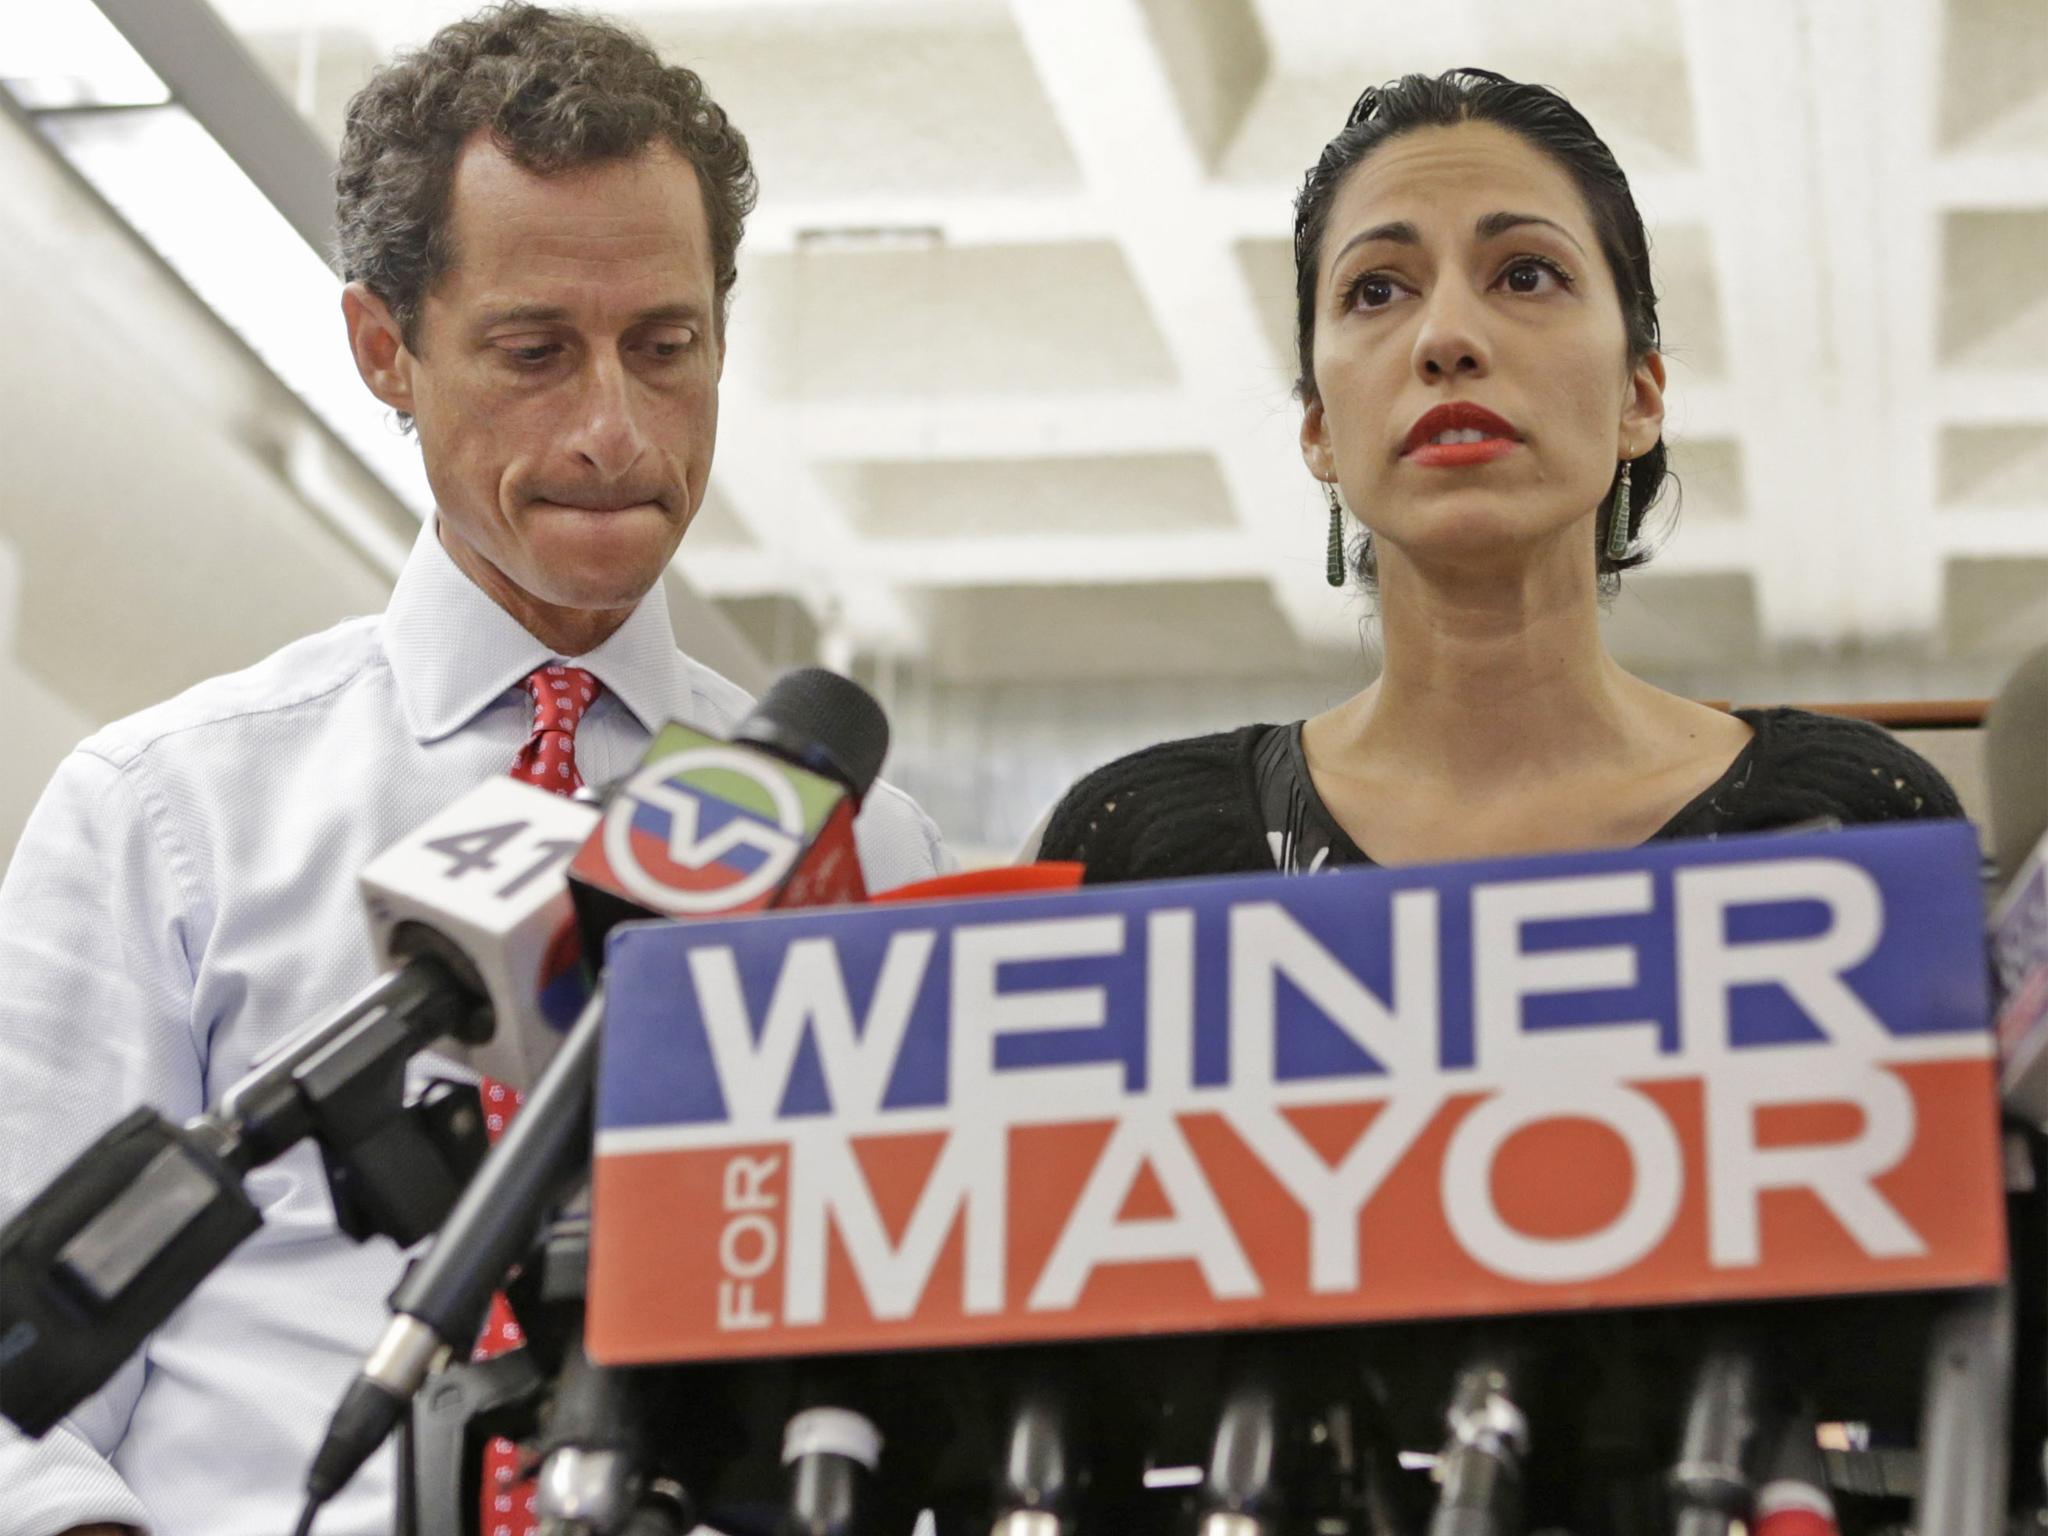 Weiner and Abedin at a press conference after news of his second sexting scandal broke in 2013